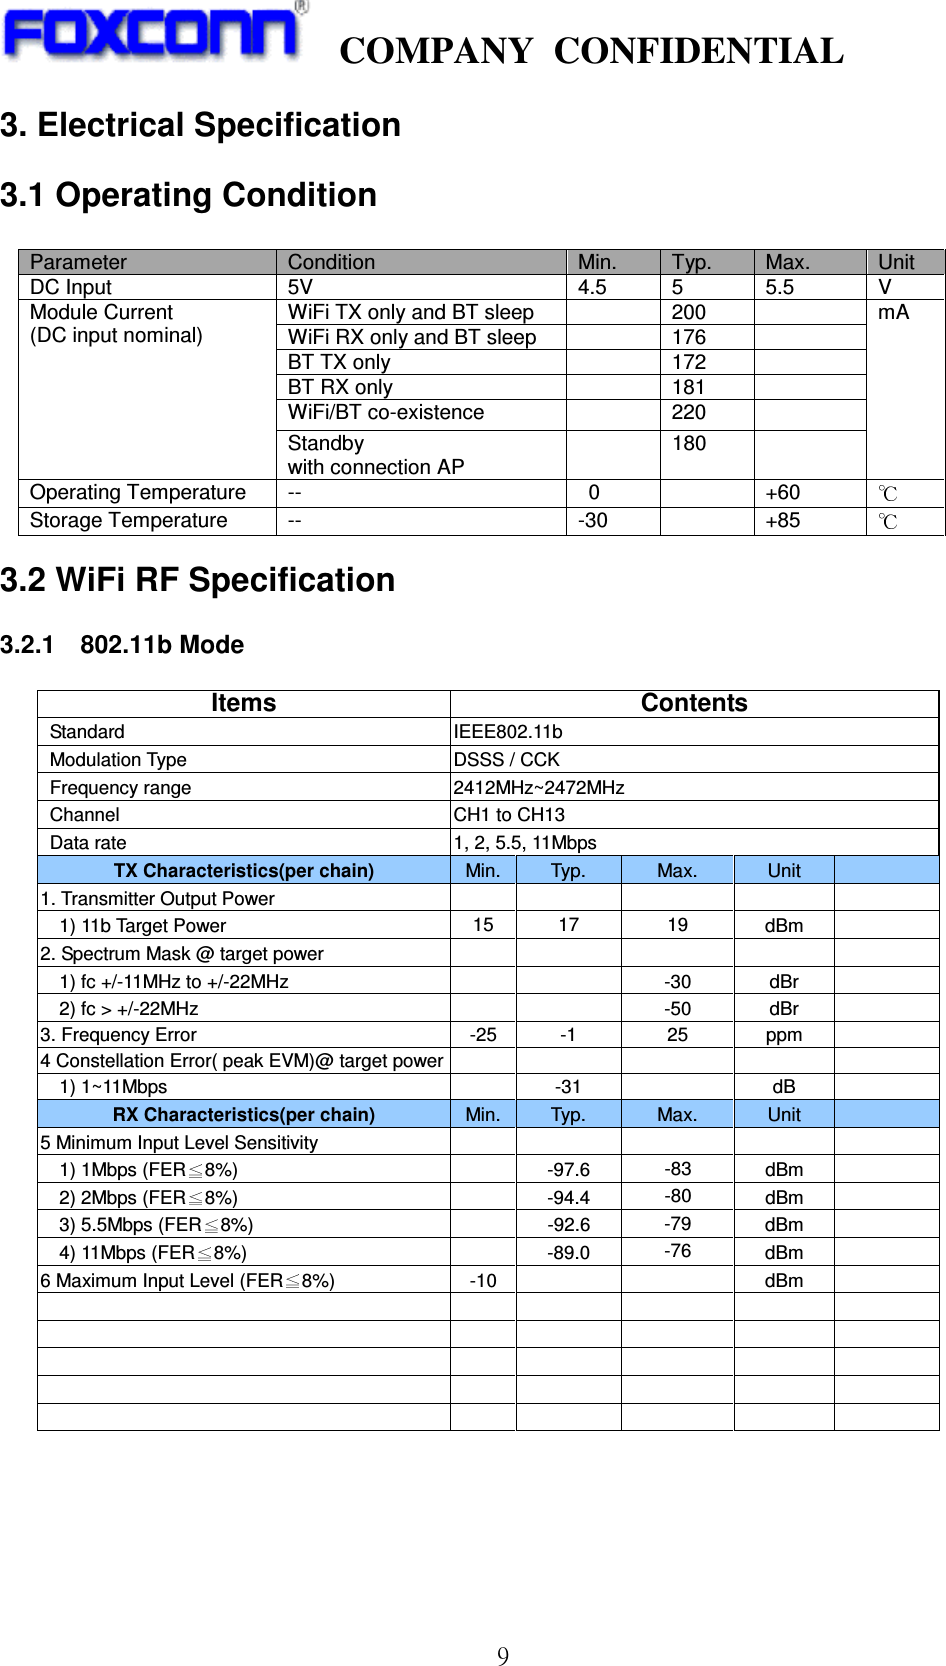    COMPANY  CONFIDENTIAL             9 3. Electrical Specification 3.1 Operating Condition  Parameter  Condition  Min.  Typ.  Max.  Unit DC Input    5V  4.5  5  5.5  V Module Current (DC input nominal) WiFi TX only and BT sleep    200   mA WiFi RX only and BT sleep    176   BT TX only    172   BT RX only    181   WiFi/BT co-existence    220   Standby   with connection AP   180   Operating Temperature  --  0    +60   Storage Temperature  --  -30    +85   3.2 WiFi RF Specification 3.2.1    802.11b Mode                                                                                           Items Contents   Standard  IEEE802.11b   Modulation Type  DSSS / CCK   Frequency range  2412MHz~2472MHz   Channel  CH1 to CH13     Data rate  1, 2, 5.5, 11Mbps TX Characteristics(per chain)  Min. Typ.  Max.  Unit  1. Transmitter Output Power               1) 11b Target Power  15  17  19  dBm   2. Spectrum Mask @ target power               1) fc +/-11MHz to +/-22MHz      -30  dBr       2) fc &gt; +/-22MHz                                        -50  dBr   3. Frequency Error    -25  -1  25  ppm   4 Constellation Error( peak EVM)@ target power            1) 1~11Mbps      -31    dB   RX Characteristics(per chain)  Min. Typ.  Max.  Unit   5 Minimum Input Level Sensitivity             1) 1Mbps (FER 8%)    -97.6  -83  dBm       2) 2Mbps (FER 8%)    -94.4  -80  dBm       3) 5.5Mbps (FER 8%)    -92.6  -79  dBm       4) 11Mbps (FER 8%)    -89.0  -76  dBm   6 Maximum Input Level (FER 8%)  -10      dBm                                                        